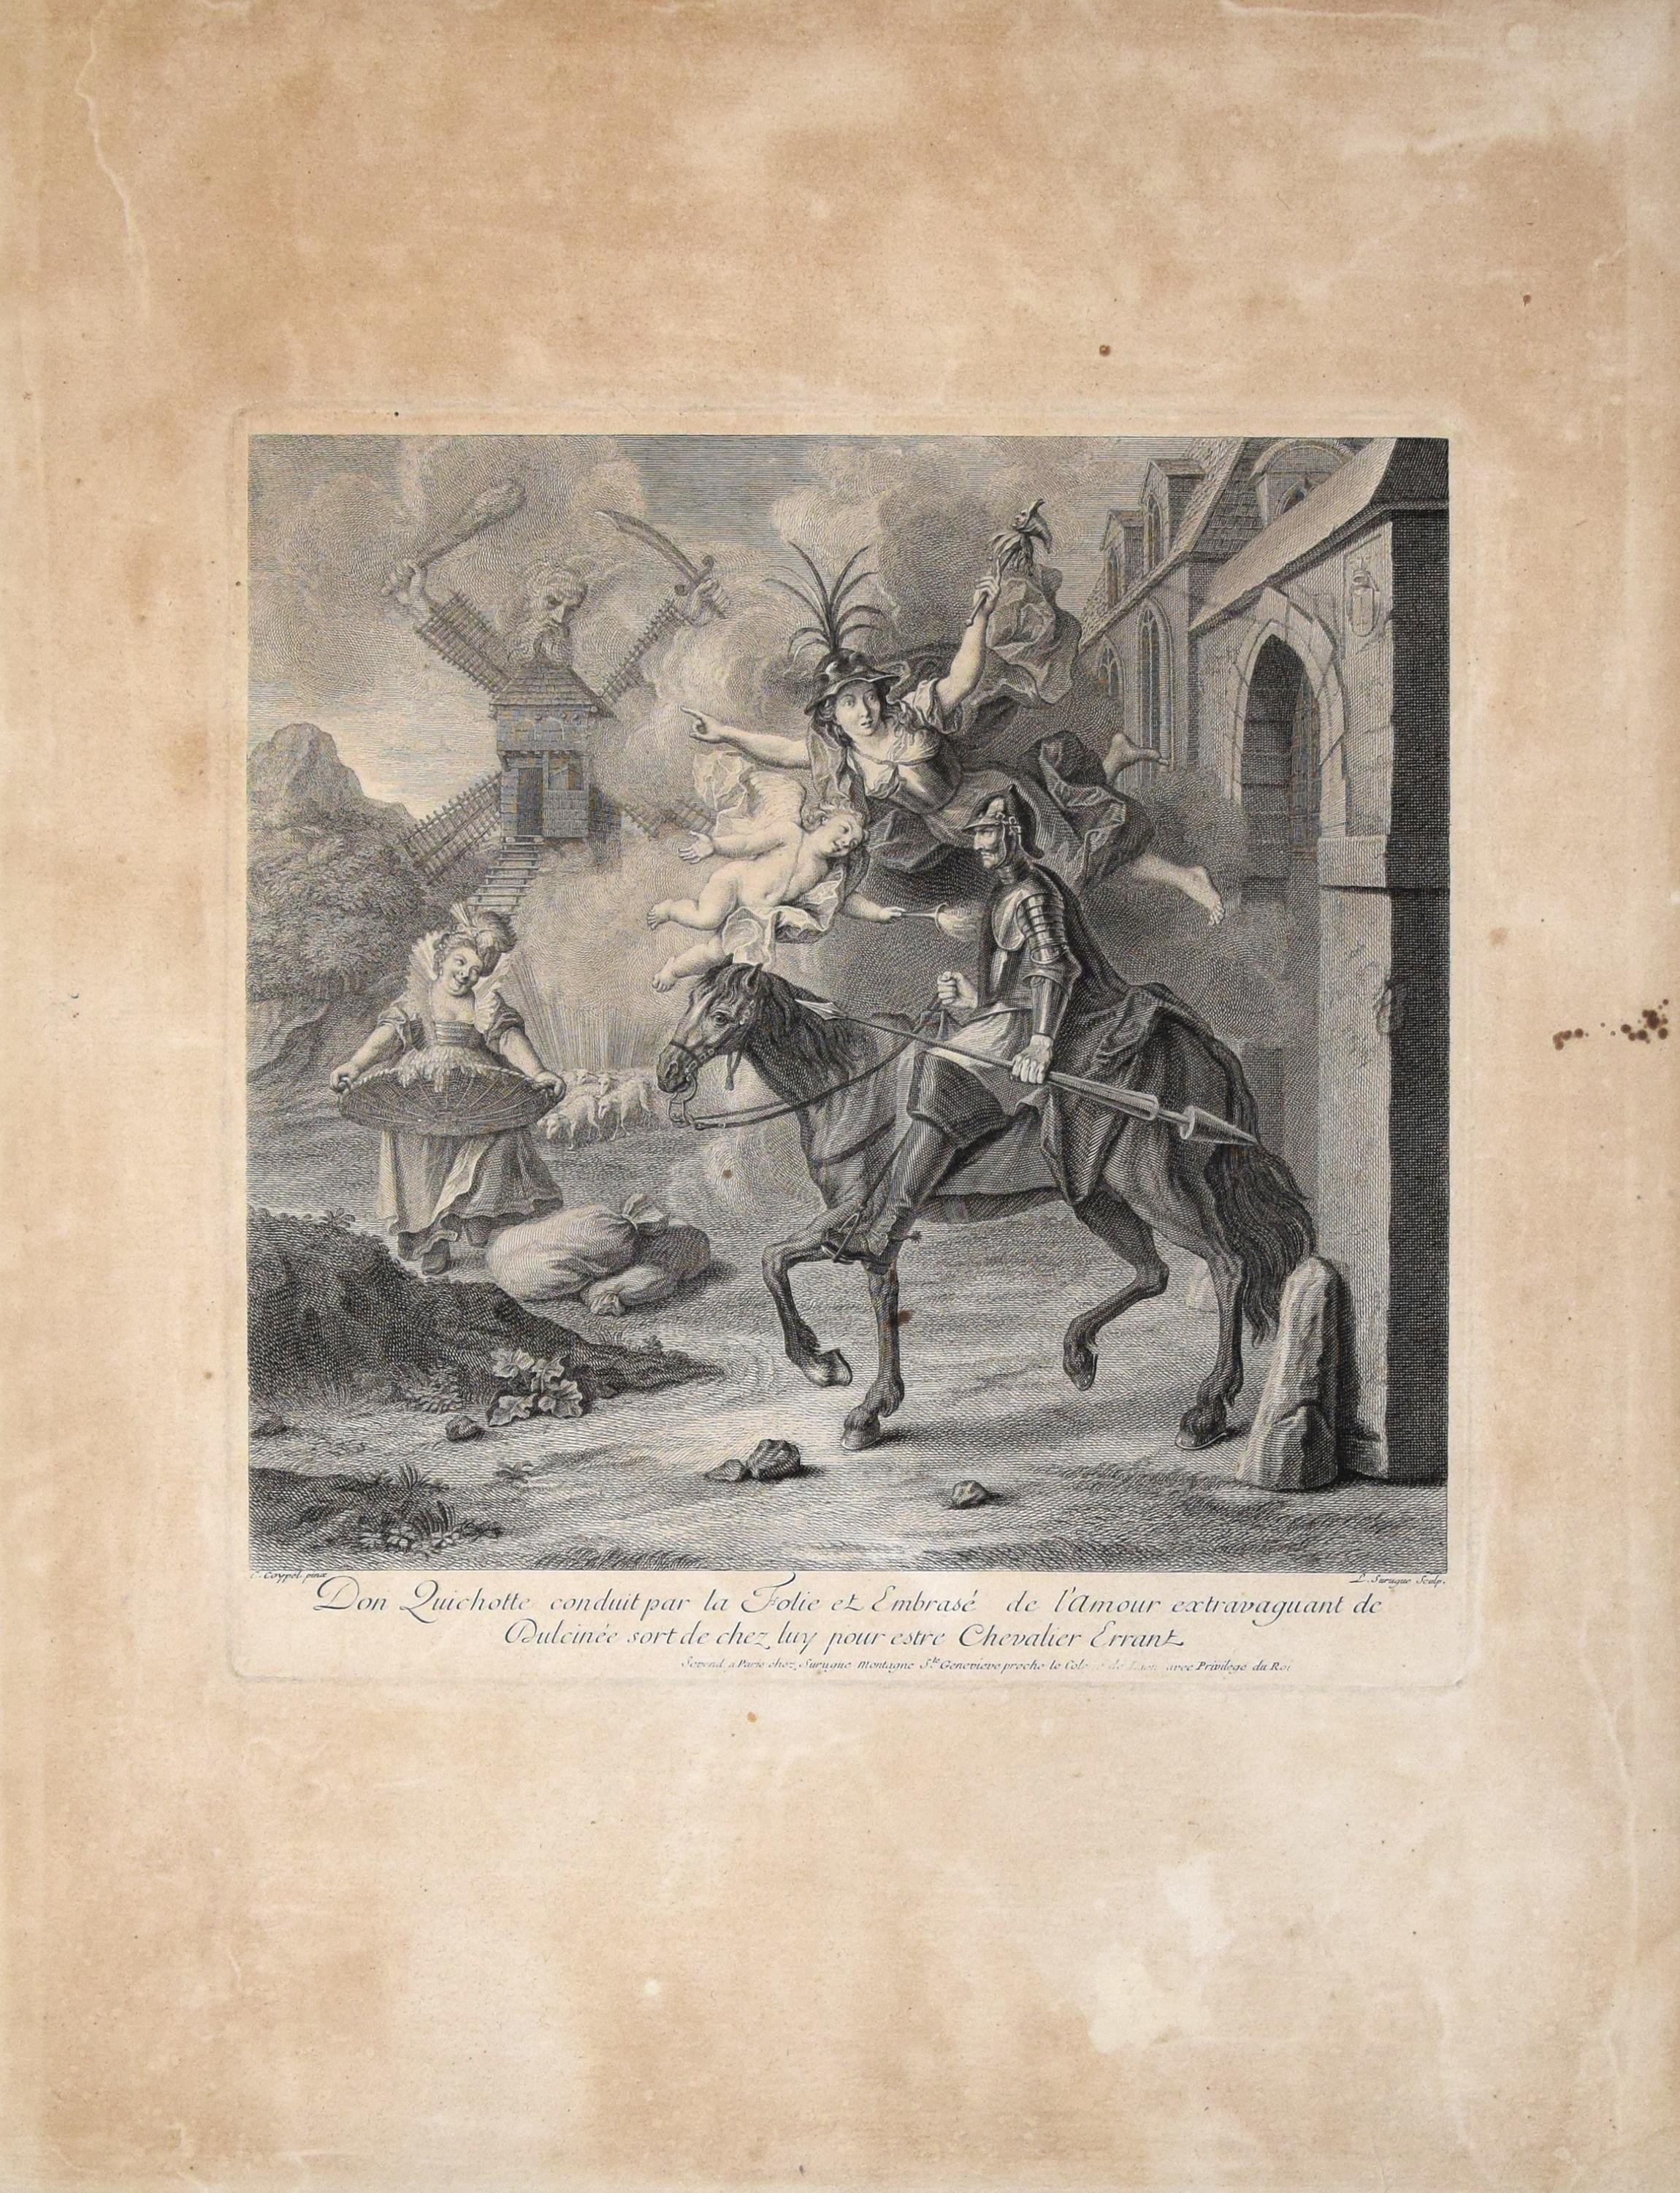 Don Quichotte conduit par la Folie is an original artwork realized by Louis Surugne in 1730. Etching on paper.

Proof of the 1st tirage (chez Surugne). Titled and signed on plate on the lower margin. 

Fair conditions, except for two small spots on